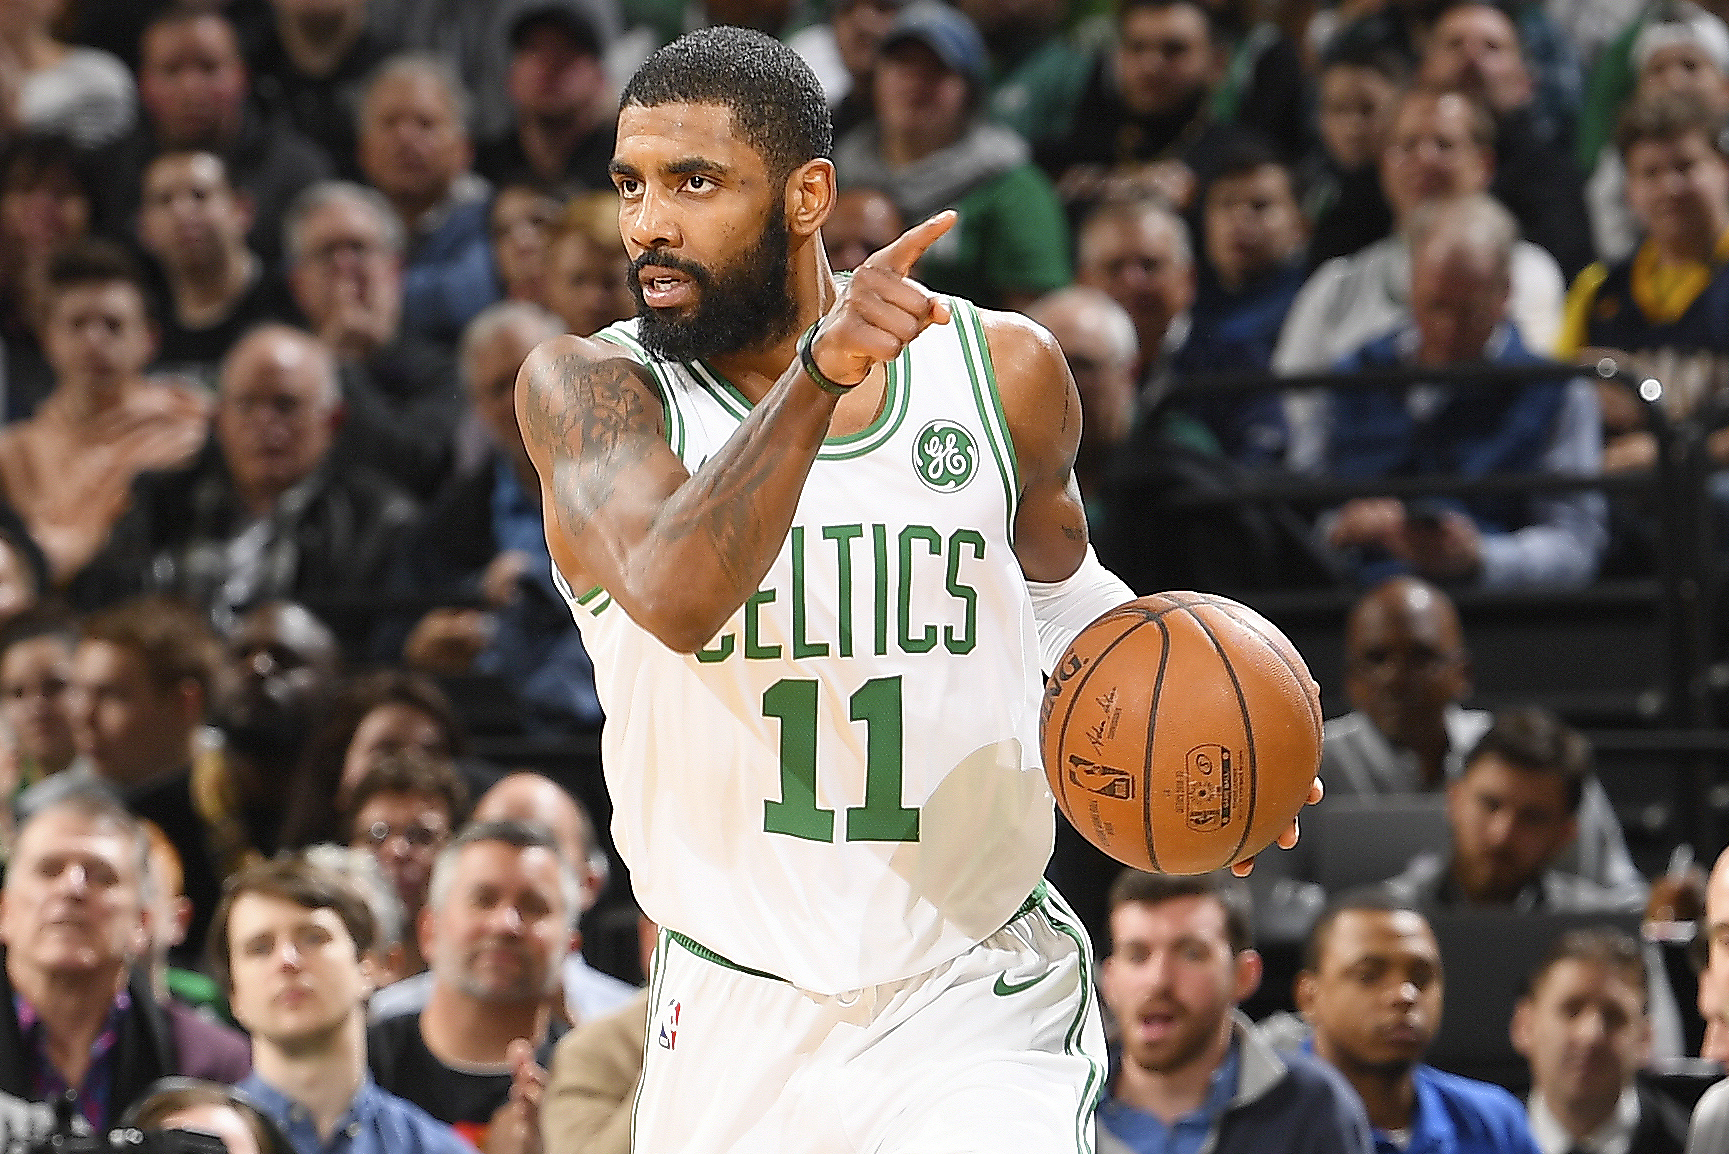 Kyrie Irving scores 22 points as Boston Celtics blow out New York Knicks, NBA News